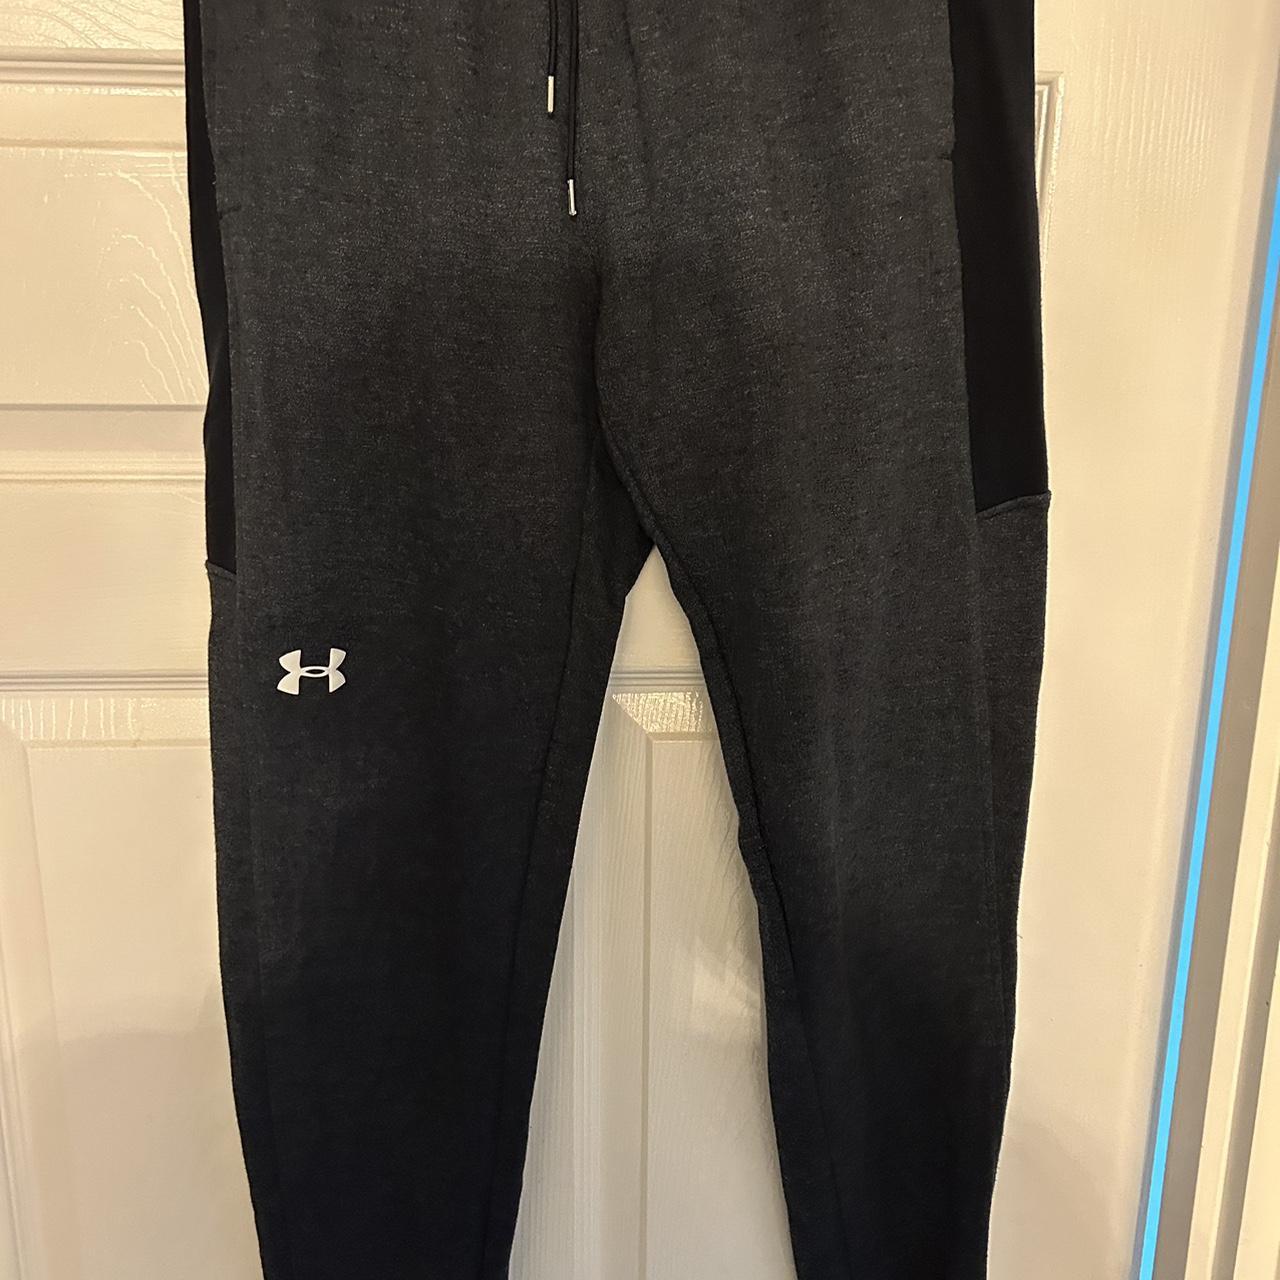 Under Armour tracksuit in navy